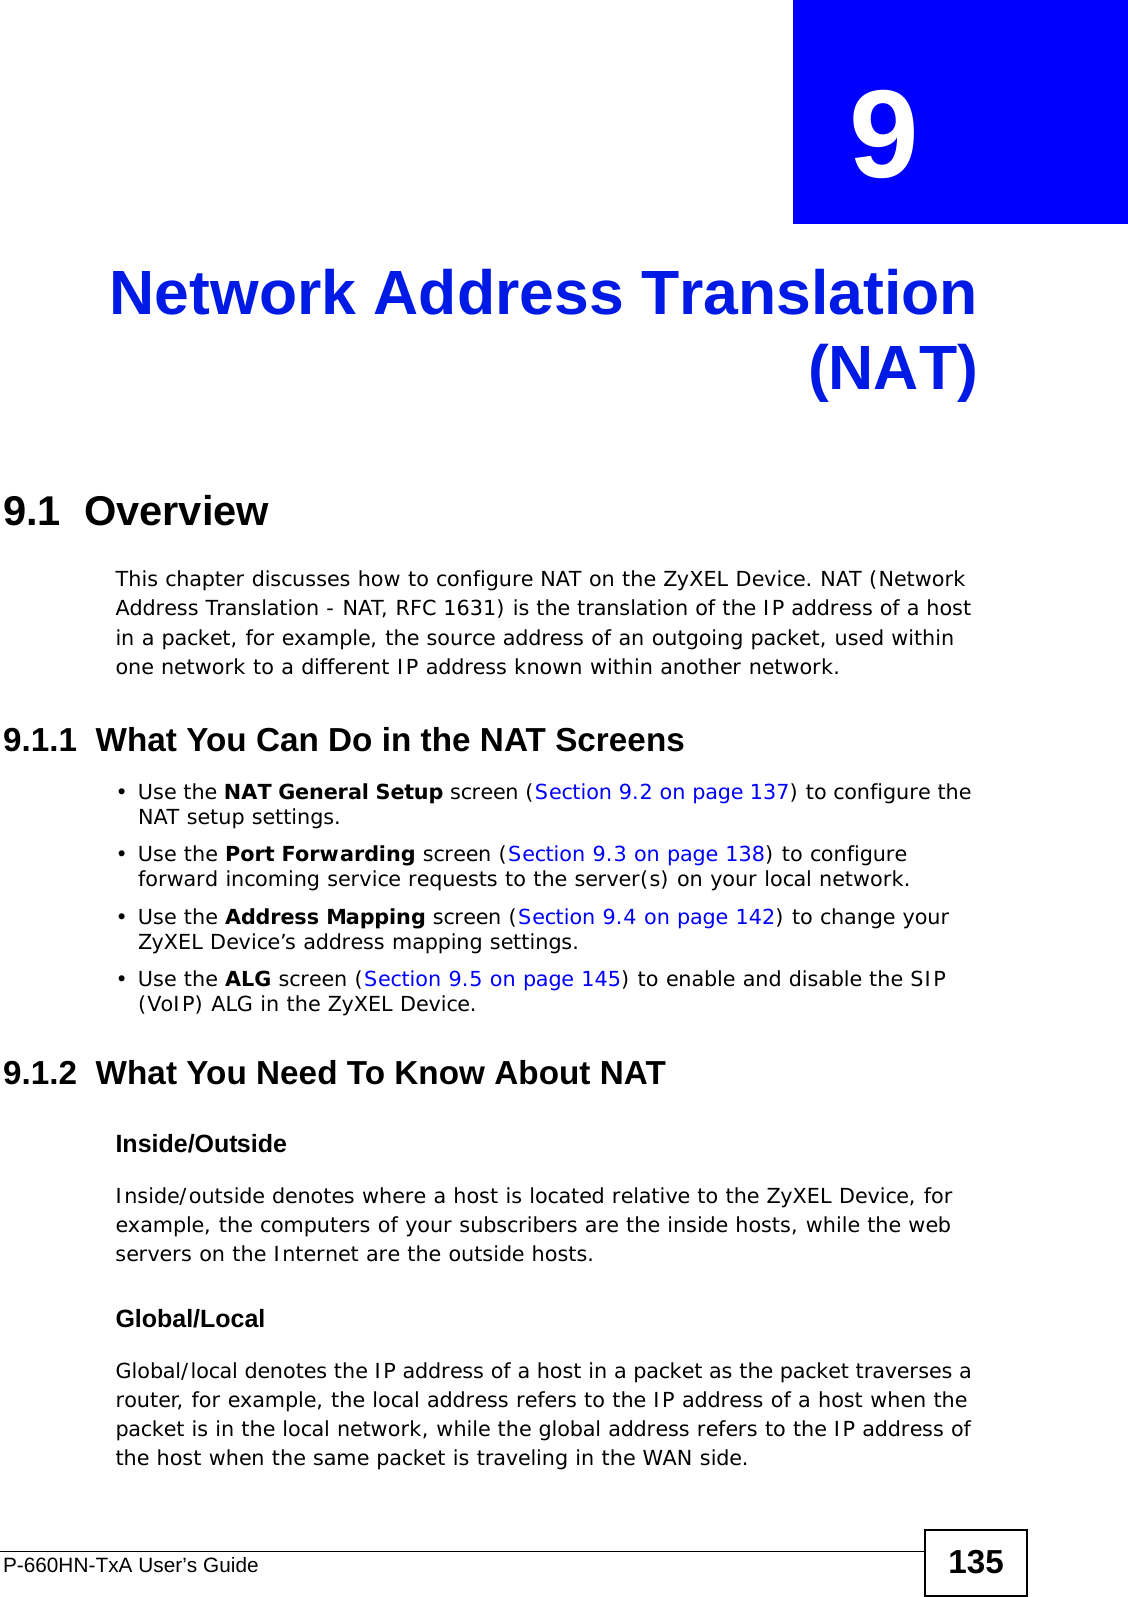 P-660HN-TxA User’s Guide 135CHAPTER  9 Network Address Translation(NAT)9.1  OverviewThis chapter discusses how to configure NAT on the ZyXEL Device. NAT (Network Address Translation - NAT, RFC 1631) is the translation of the IP address of a host in a packet, for example, the source address of an outgoing packet, used within one network to a different IP address known within another network.9.1.1  What You Can Do in the NAT Screens•Use the NAT General Setup screen (Section 9.2 on page 137) to configure the NAT setup settings.•Use the Port Forwarding screen (Section 9.3 on page 138) to configure forward incoming service requests to the server(s) on your local network. •Use the Address Mapping screen (Section 9.4 on page 142) to change your ZyXEL Device’s address mapping settings.•Use the ALG screen (Section 9.5 on page 145) to enable and disable the SIP (VoIP) ALG in the ZyXEL Device.9.1.2  What You Need To Know About NATInside/OutsideInside/outside denotes where a host is located relative to the ZyXEL Device, for example, the computers of your subscribers are the inside hosts, while the web servers on the Internet are the outside hosts. Global/LocalGlobal/local denotes the IP address of a host in a packet as the packet traverses a router, for example, the local address refers to the IP address of a host when the packet is in the local network, while the global address refers to the IP address of the host when the same packet is traveling in the WAN side. 